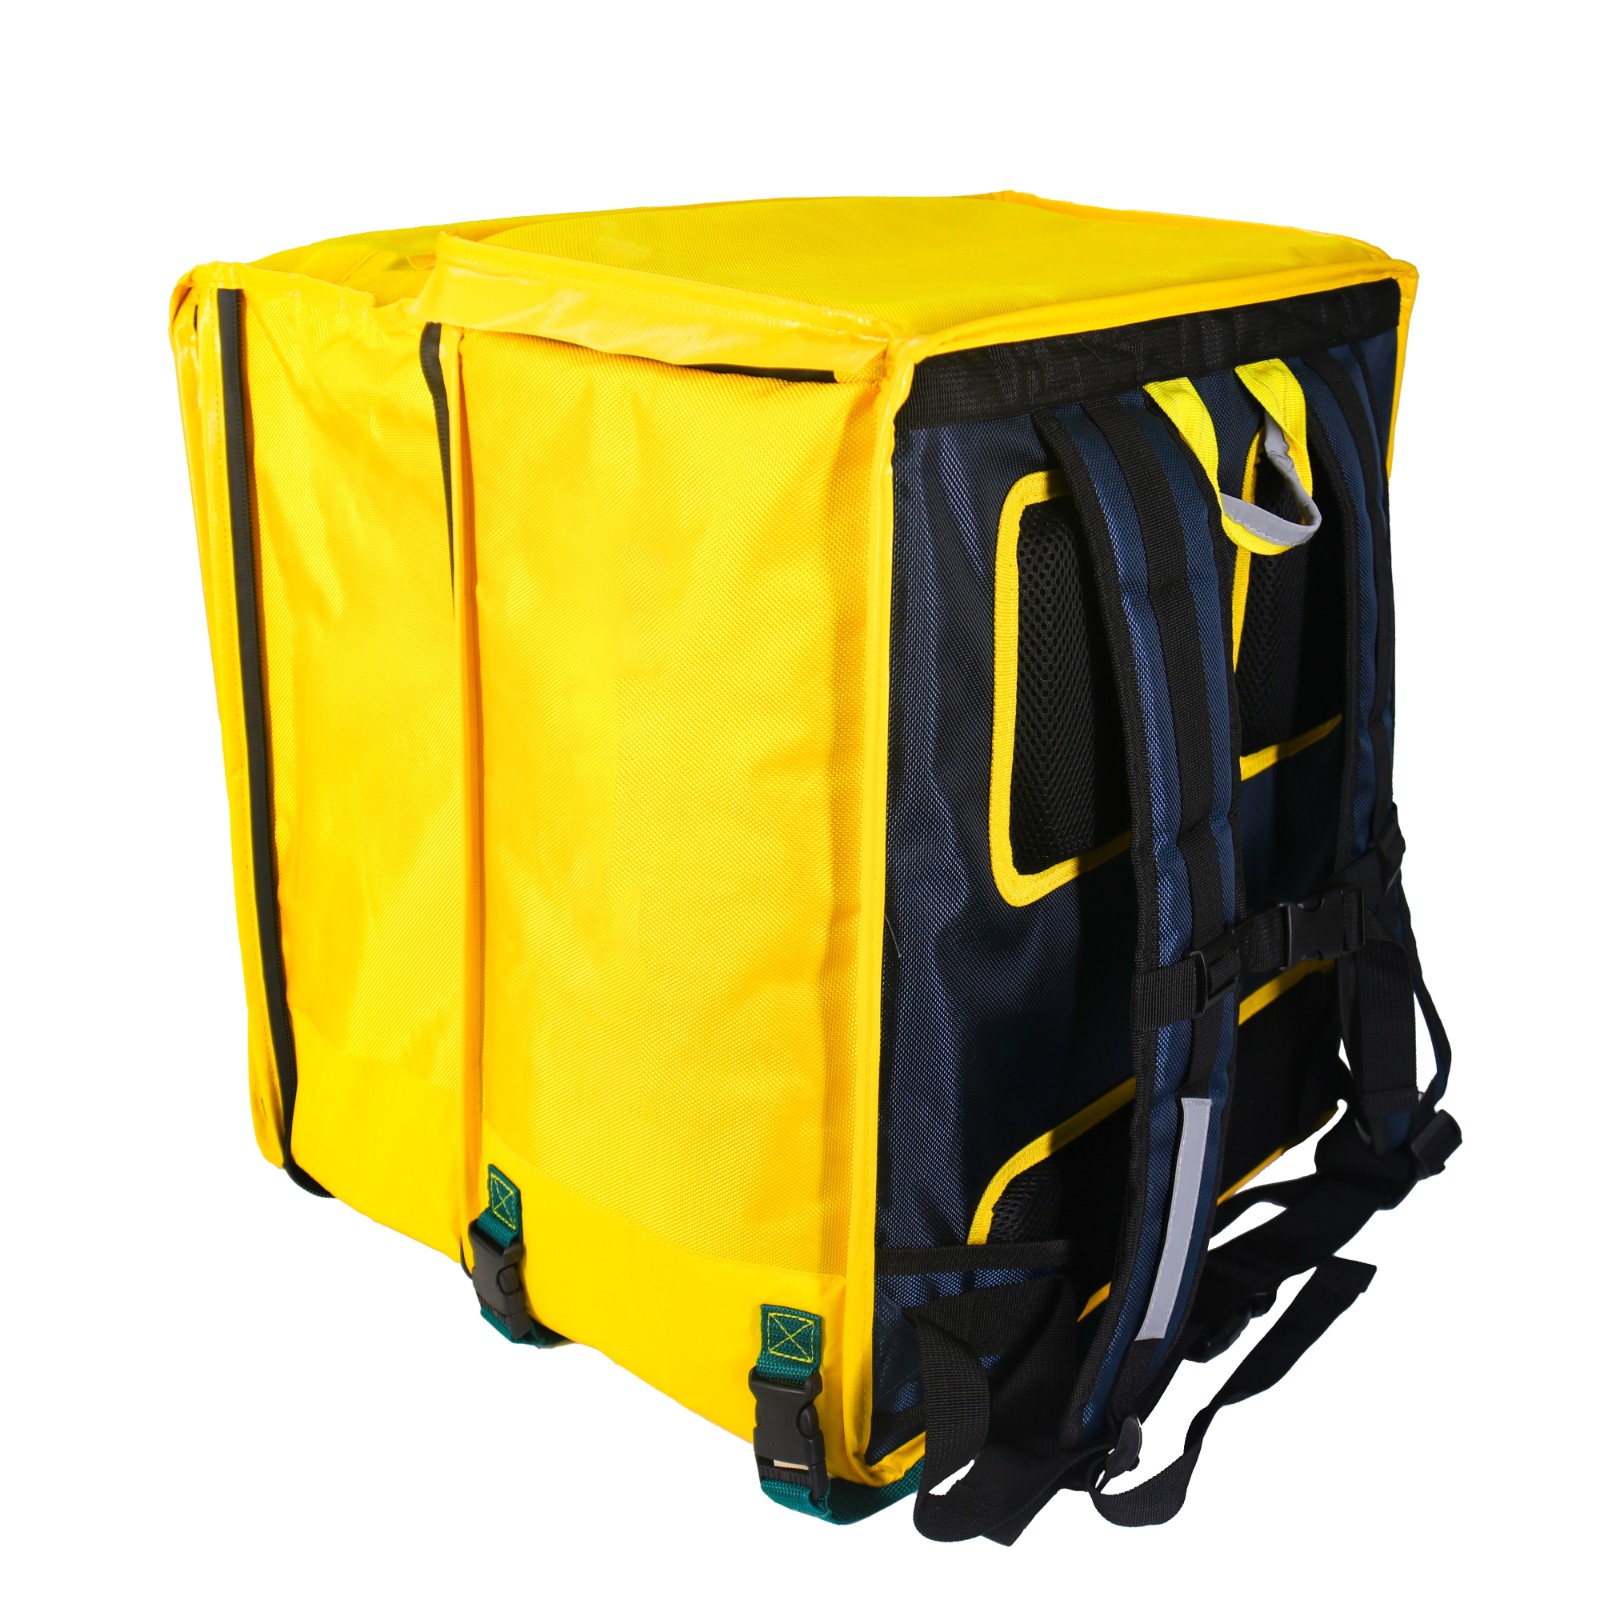 Extendable Food Delivery Backpacks - Waterproof Capacity for Uber Eats, Doordash, Seamless, and Deliveroo